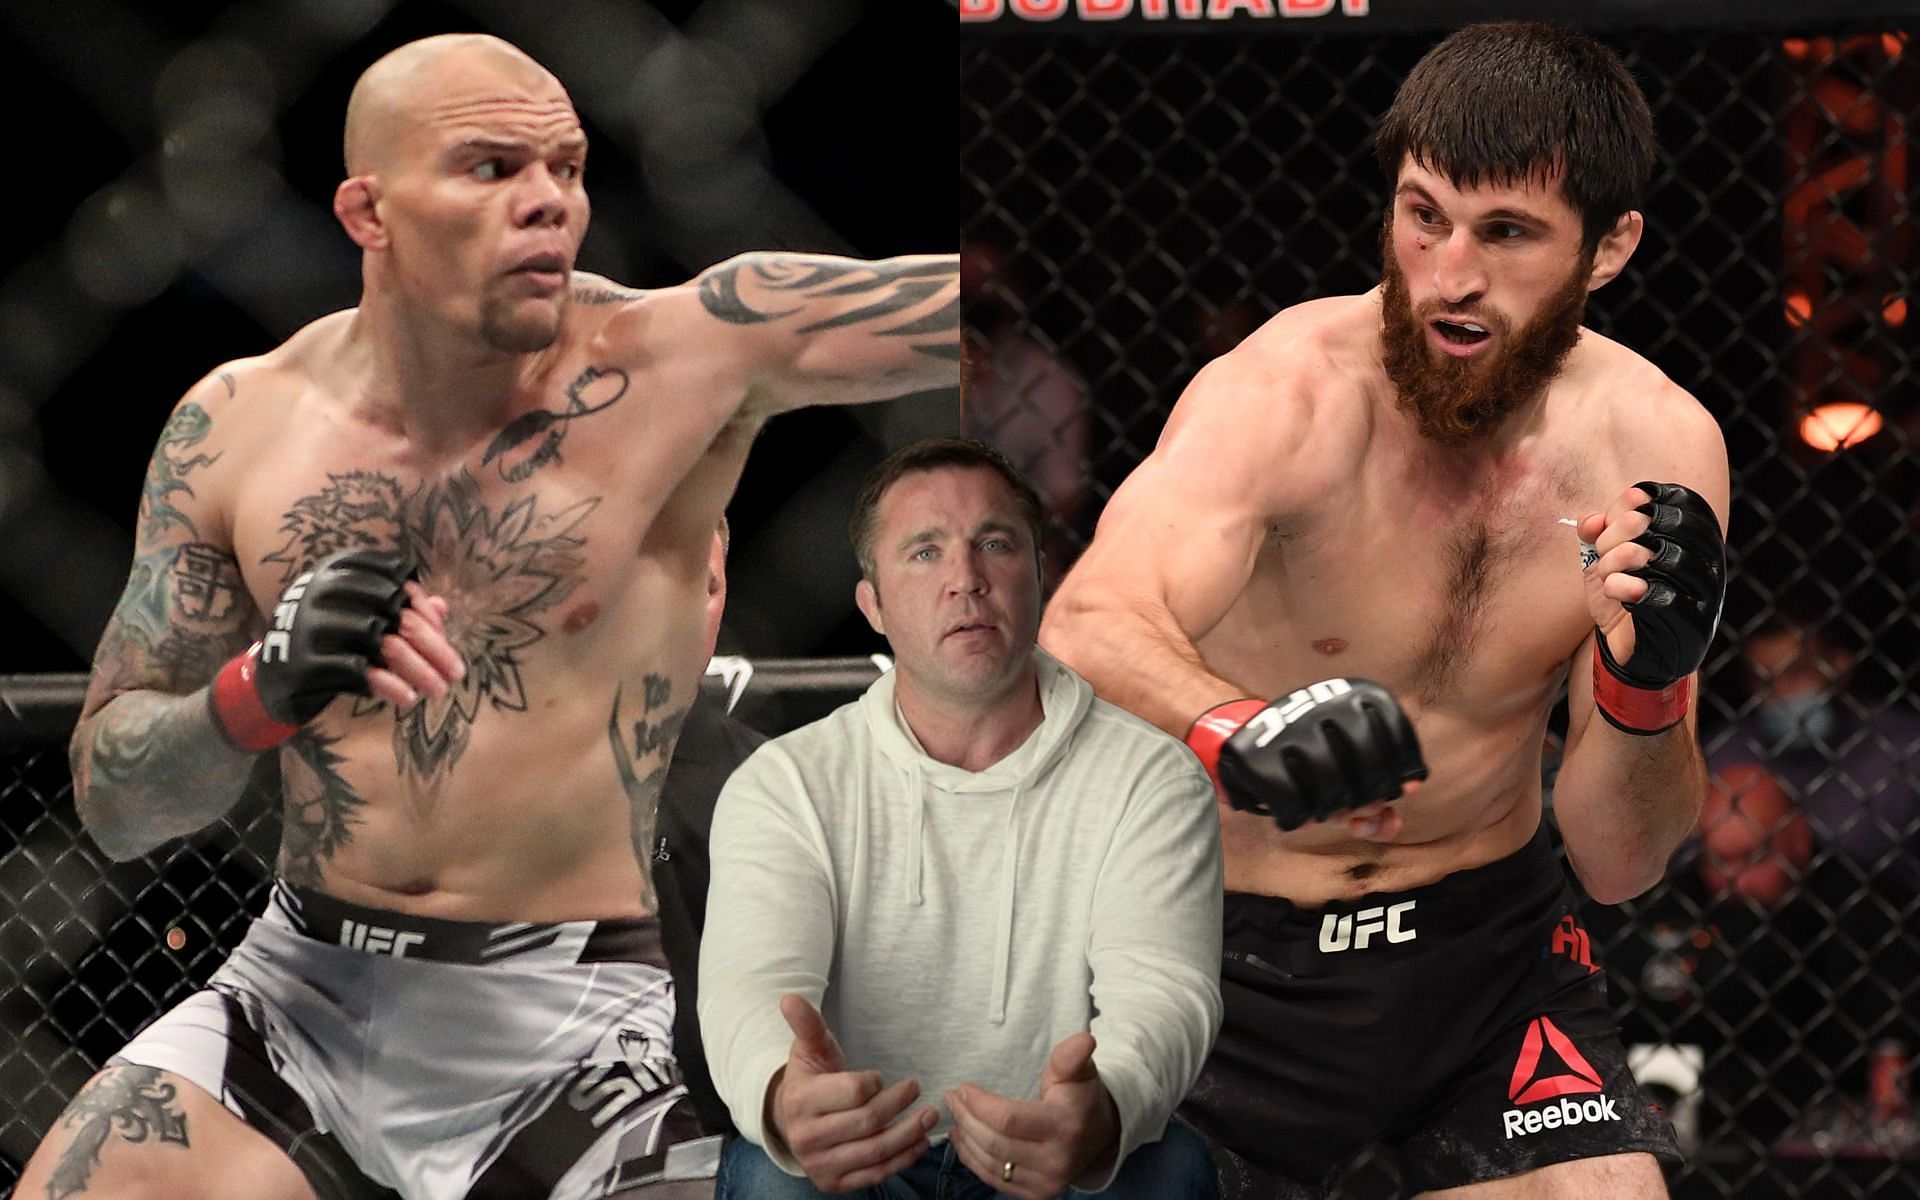 Anthony Smith (left), Chael Sonnen (center), and Magomed Ankalaev (right) (Images via Getty and YouTube/Chael Sonnen)